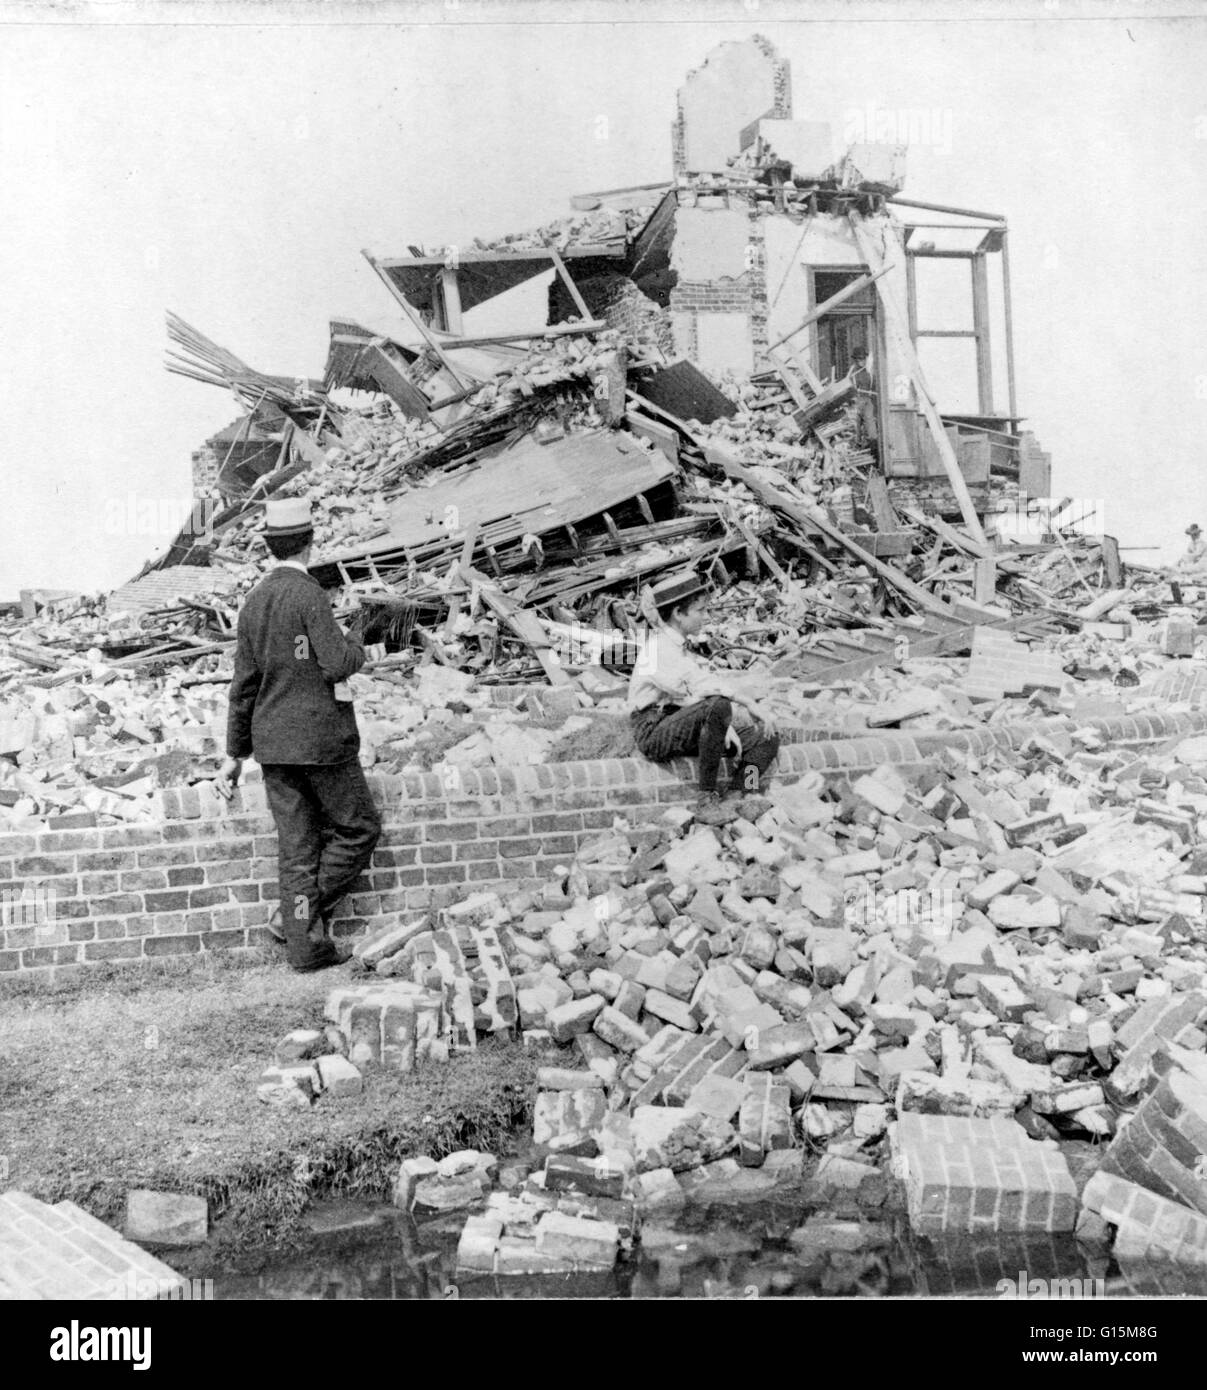 Lucas Terrace under which 51 people lie buried. Remnants of multi-story building, bricks and lumber strewn in the wake of the 1900 hurricane and flood, Galveston, Texas. The Hurricane of 1900 made landfall on the city of Galveston, Texas, on September 8, Stock Photo